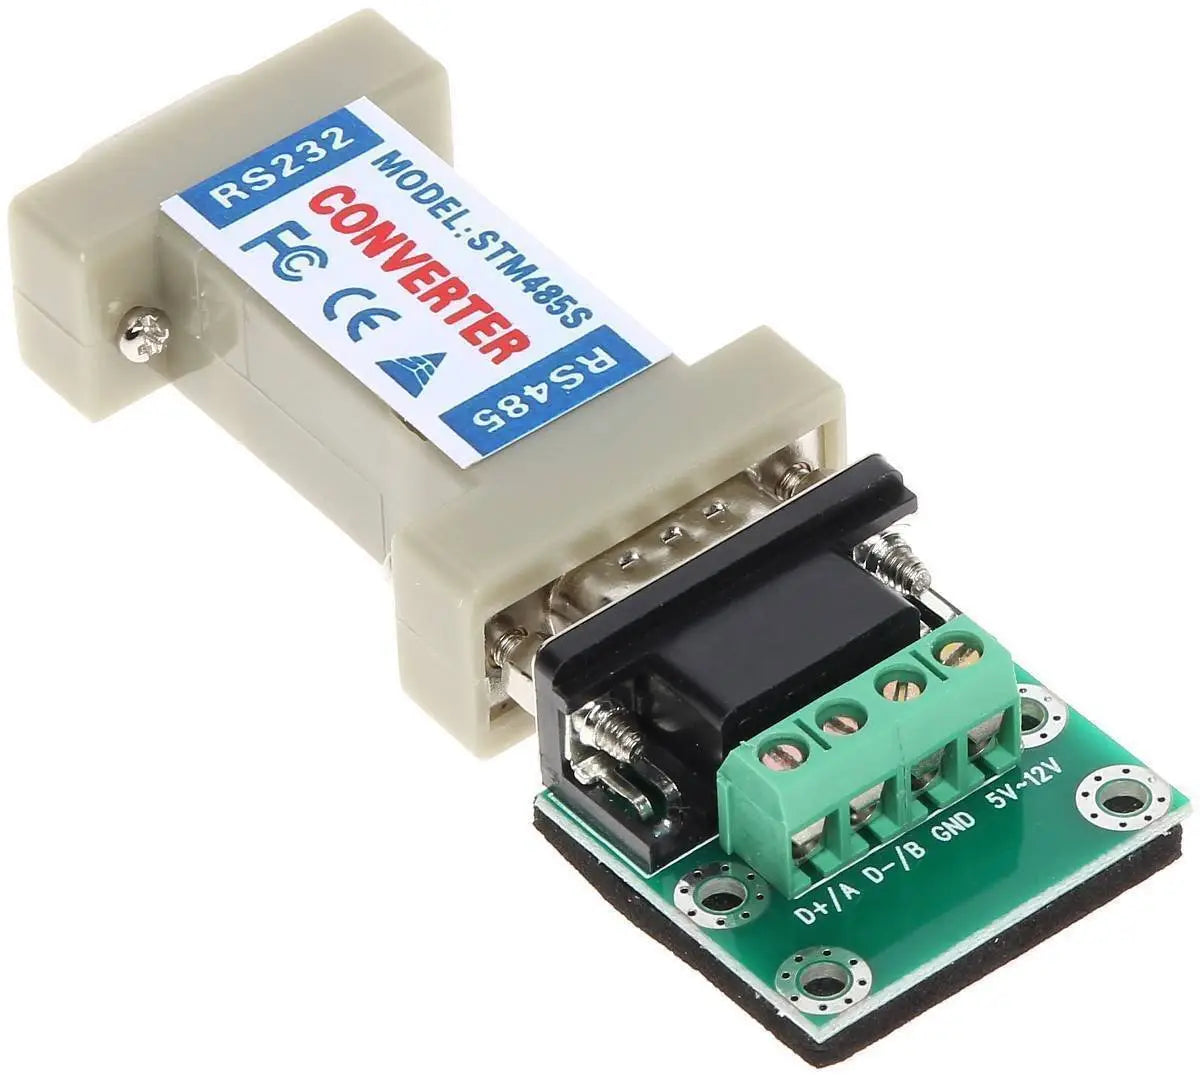 Bi Directional Communication Data Rs232 To Rs485 Serial